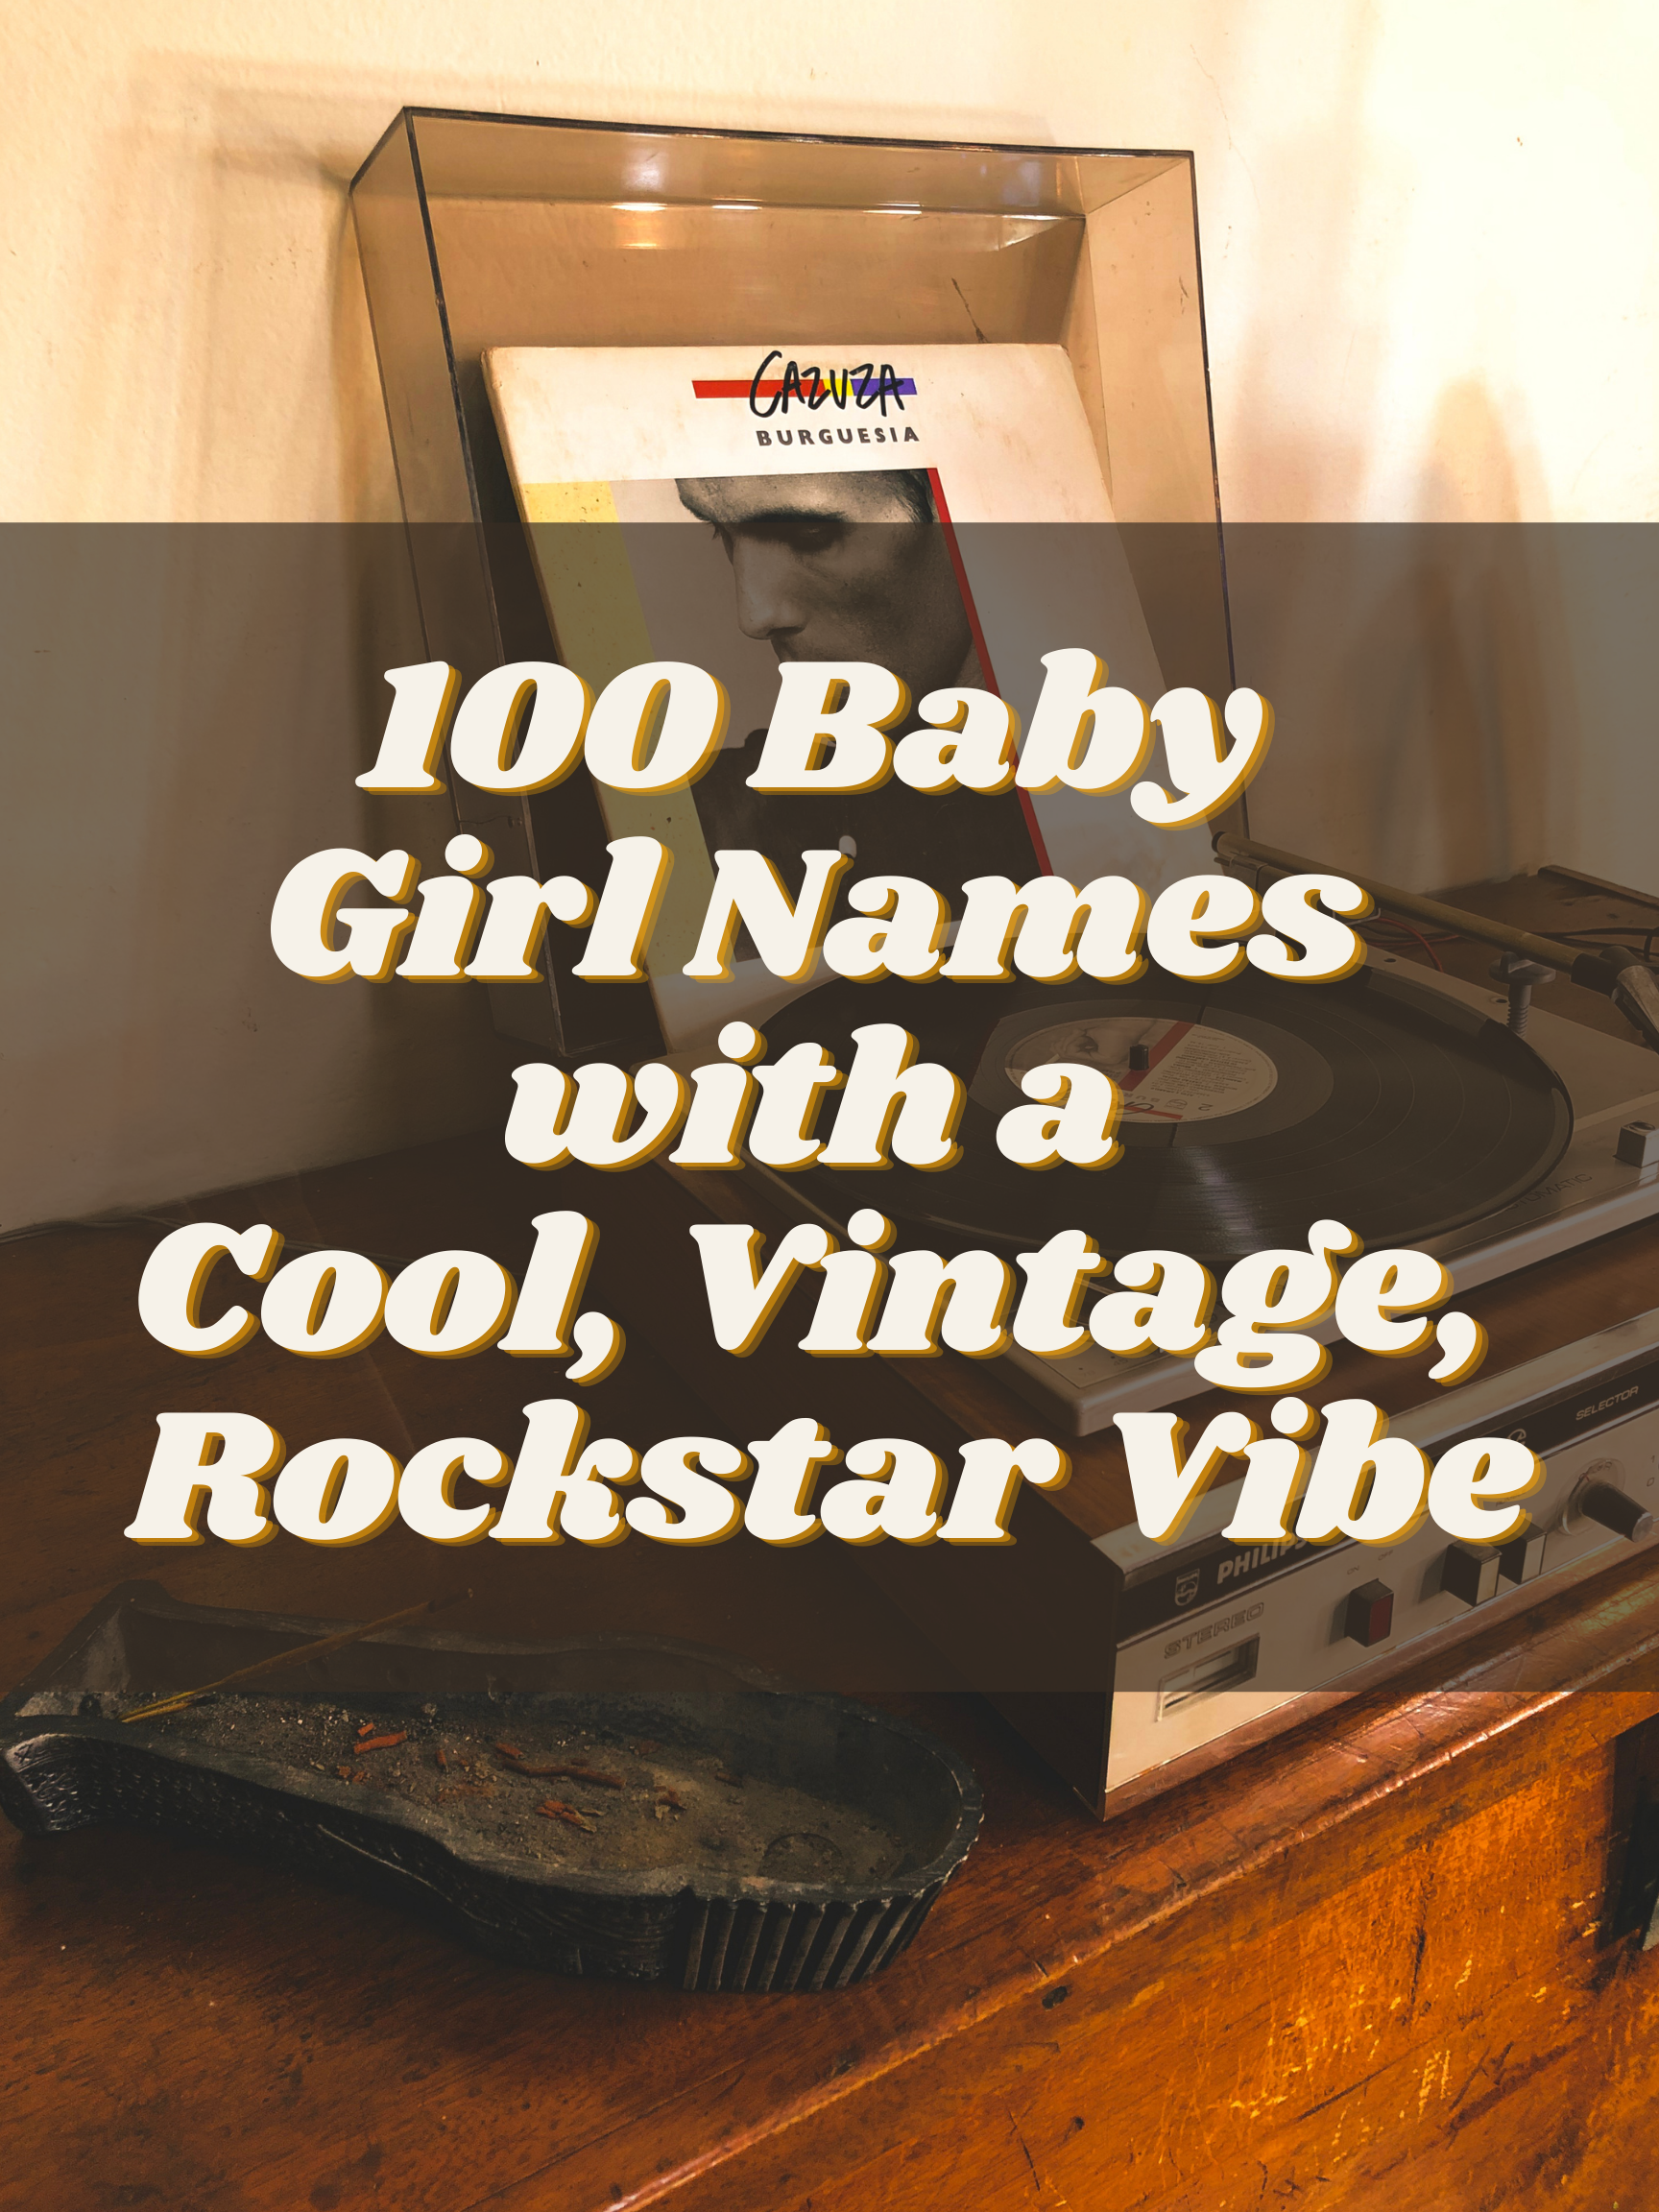 100 Baby Girl Names with a Cool, Vintage, Rockstar Vibe